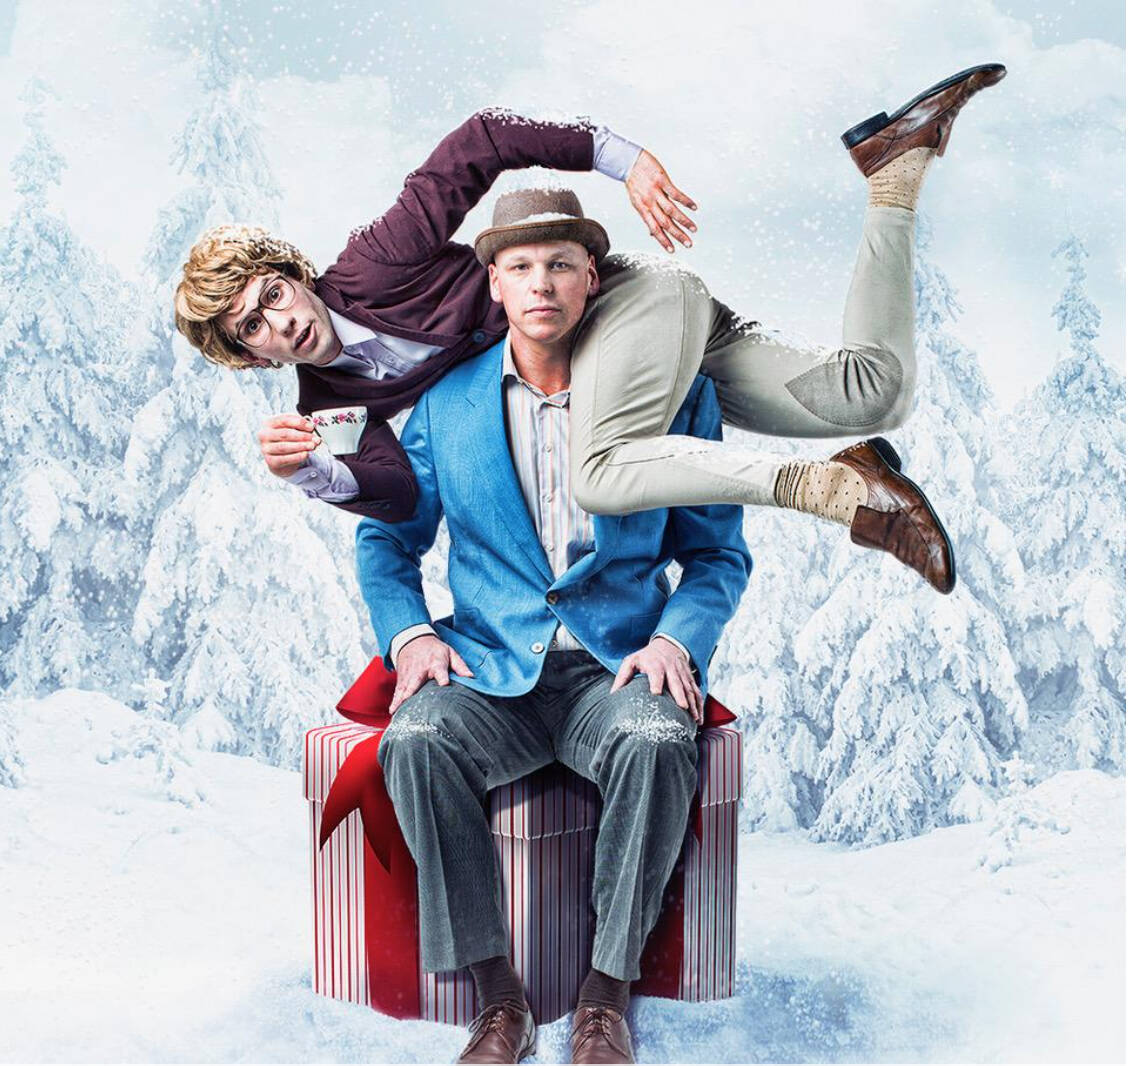 James and Jamesy bring a little humour to the holidays with <em>O Christmas Tea</em>, at the Royal Theatre Dec. 19.